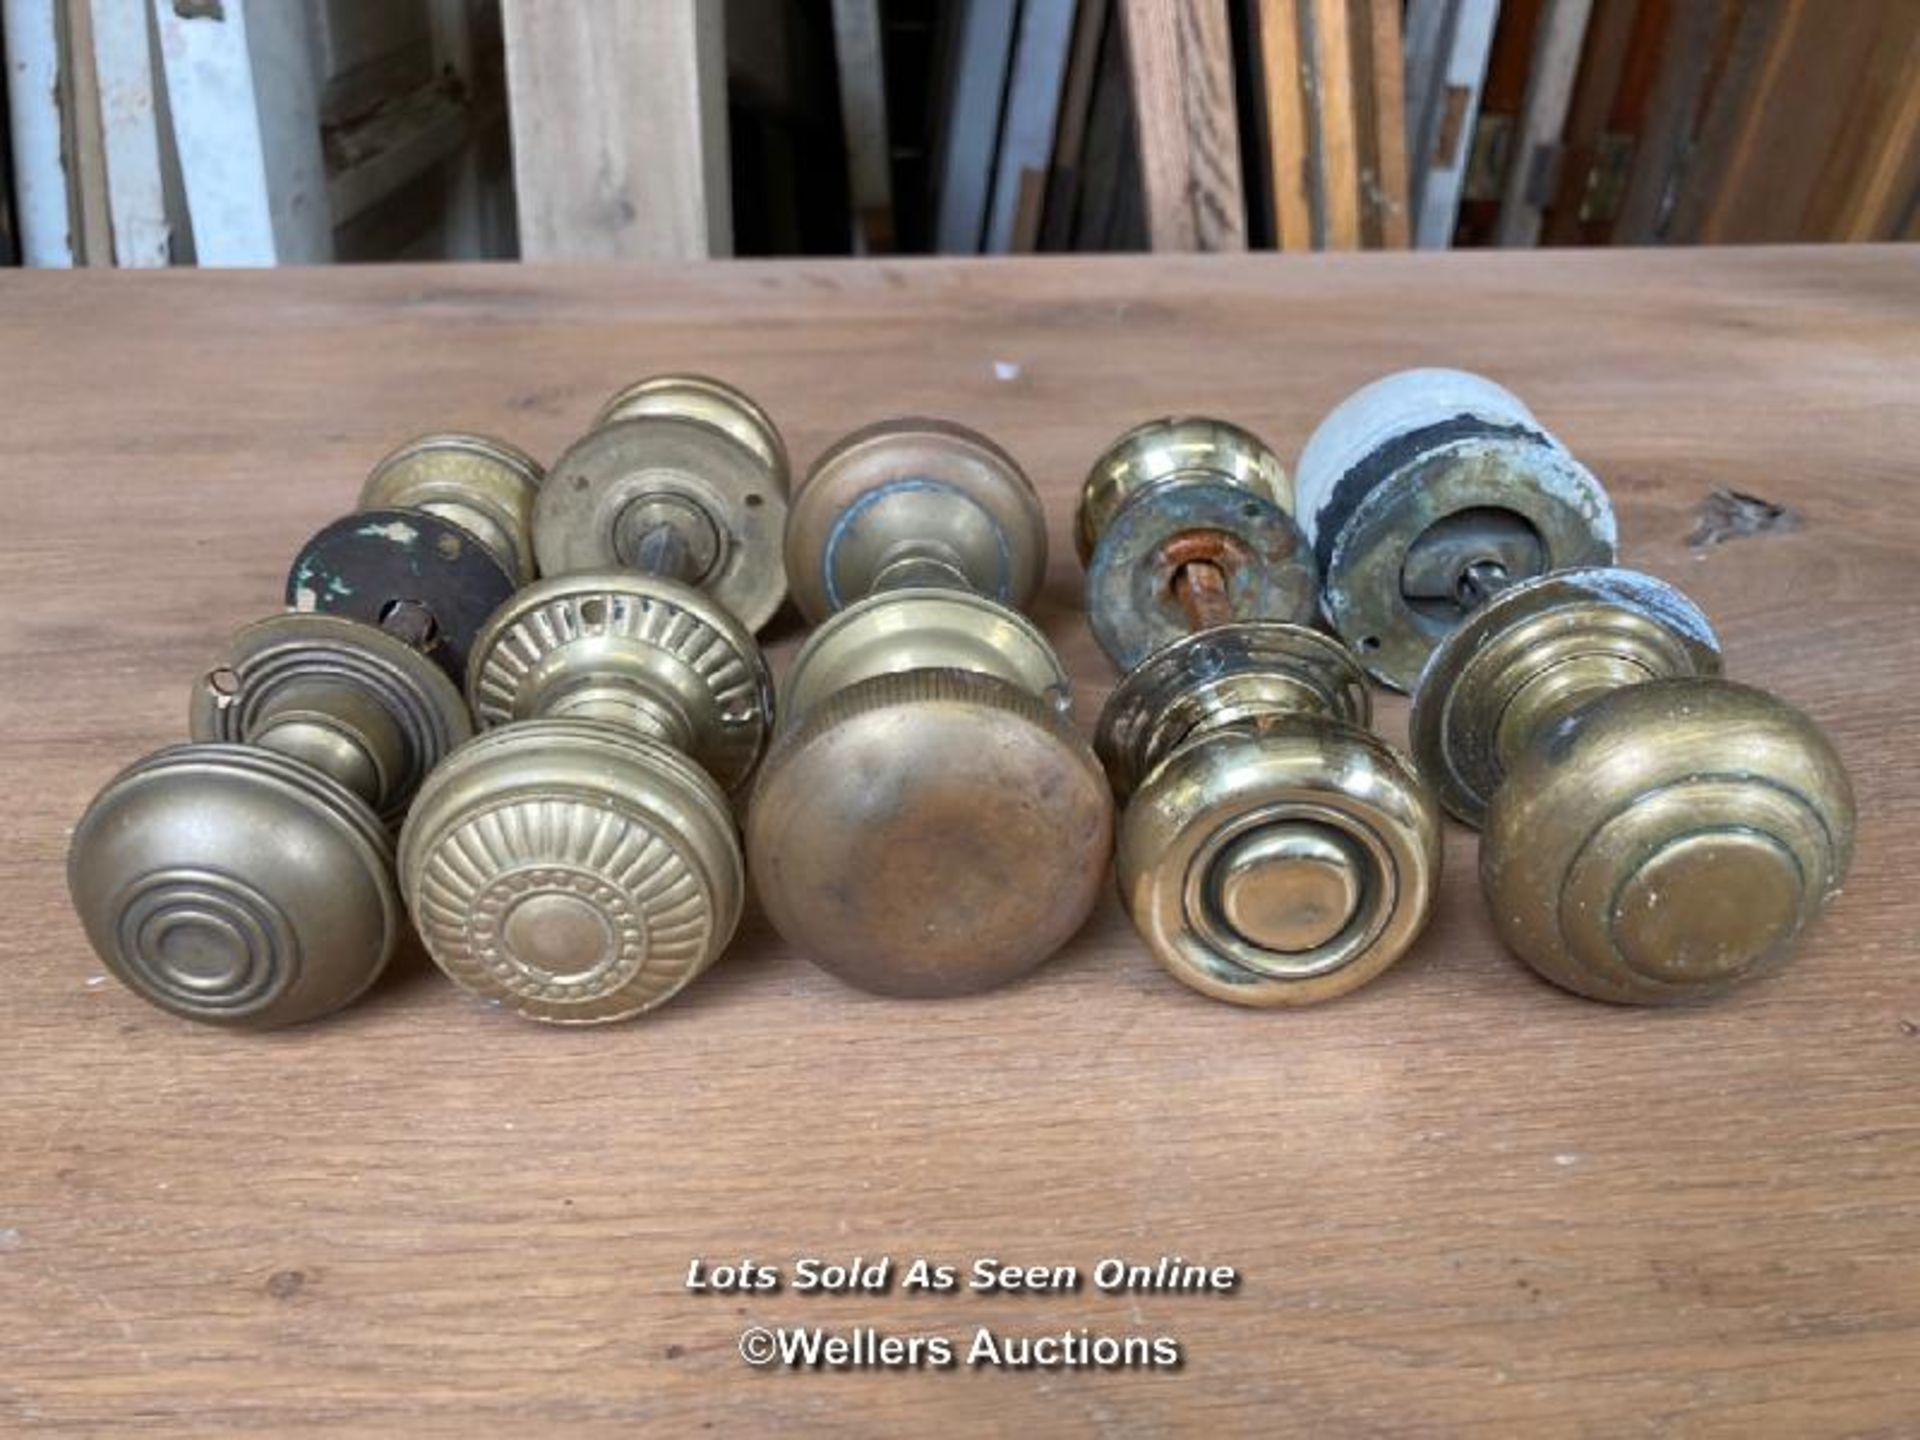 5 pairs of door handles. 4 pairs are brass and one pair is half brass and half wood. two